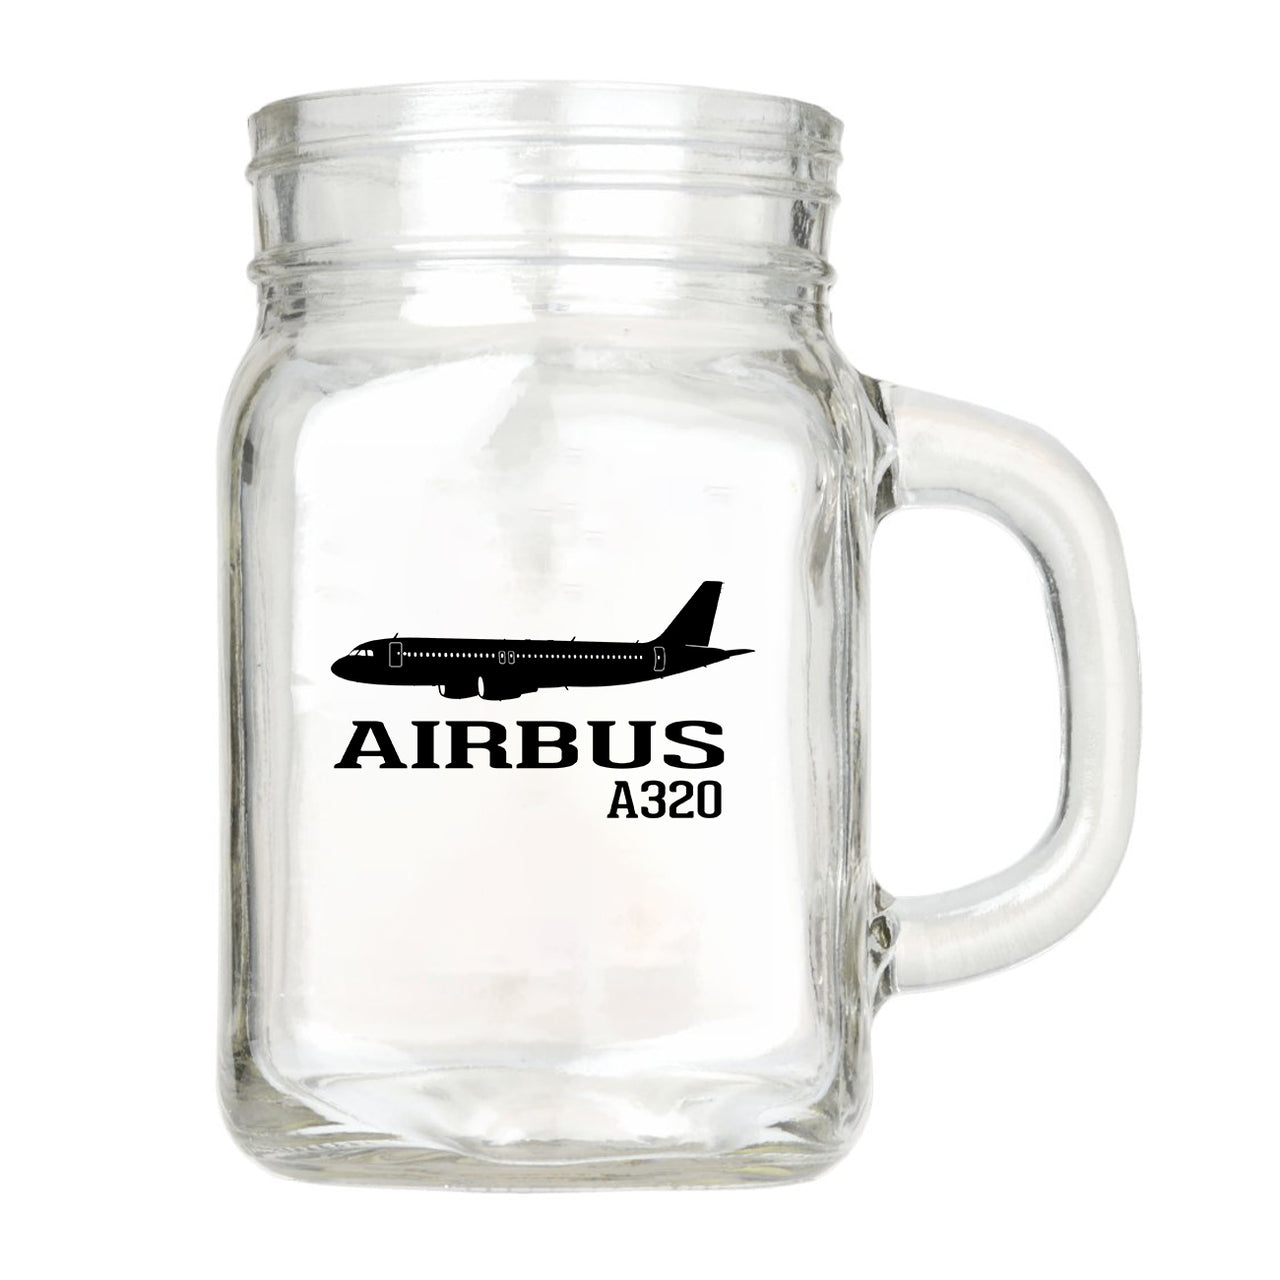 Airbus A320 Printed Designed Cocktail Glasses